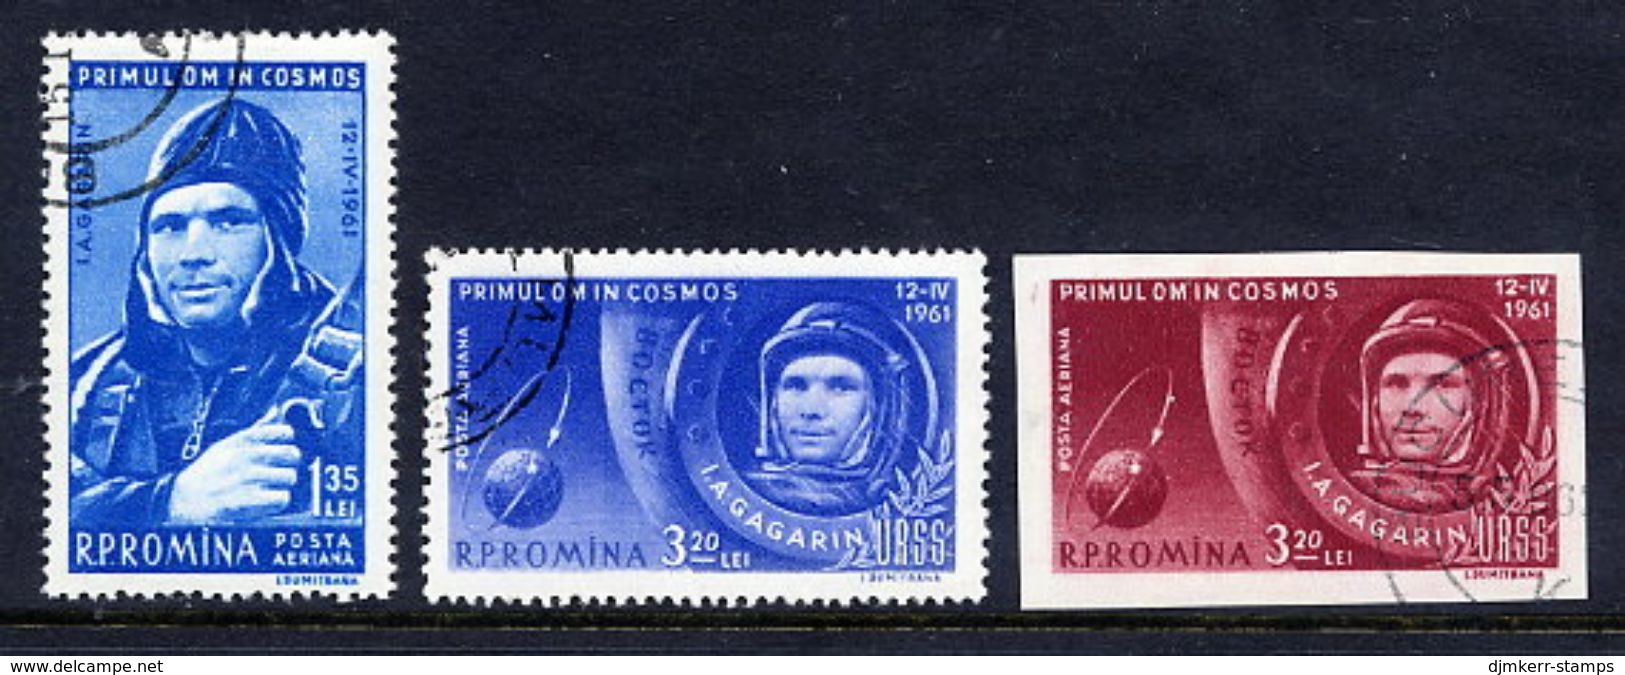 ROMANIA 1961 First Manned Space Flight  Used.  Michel 1962-64 - Usado